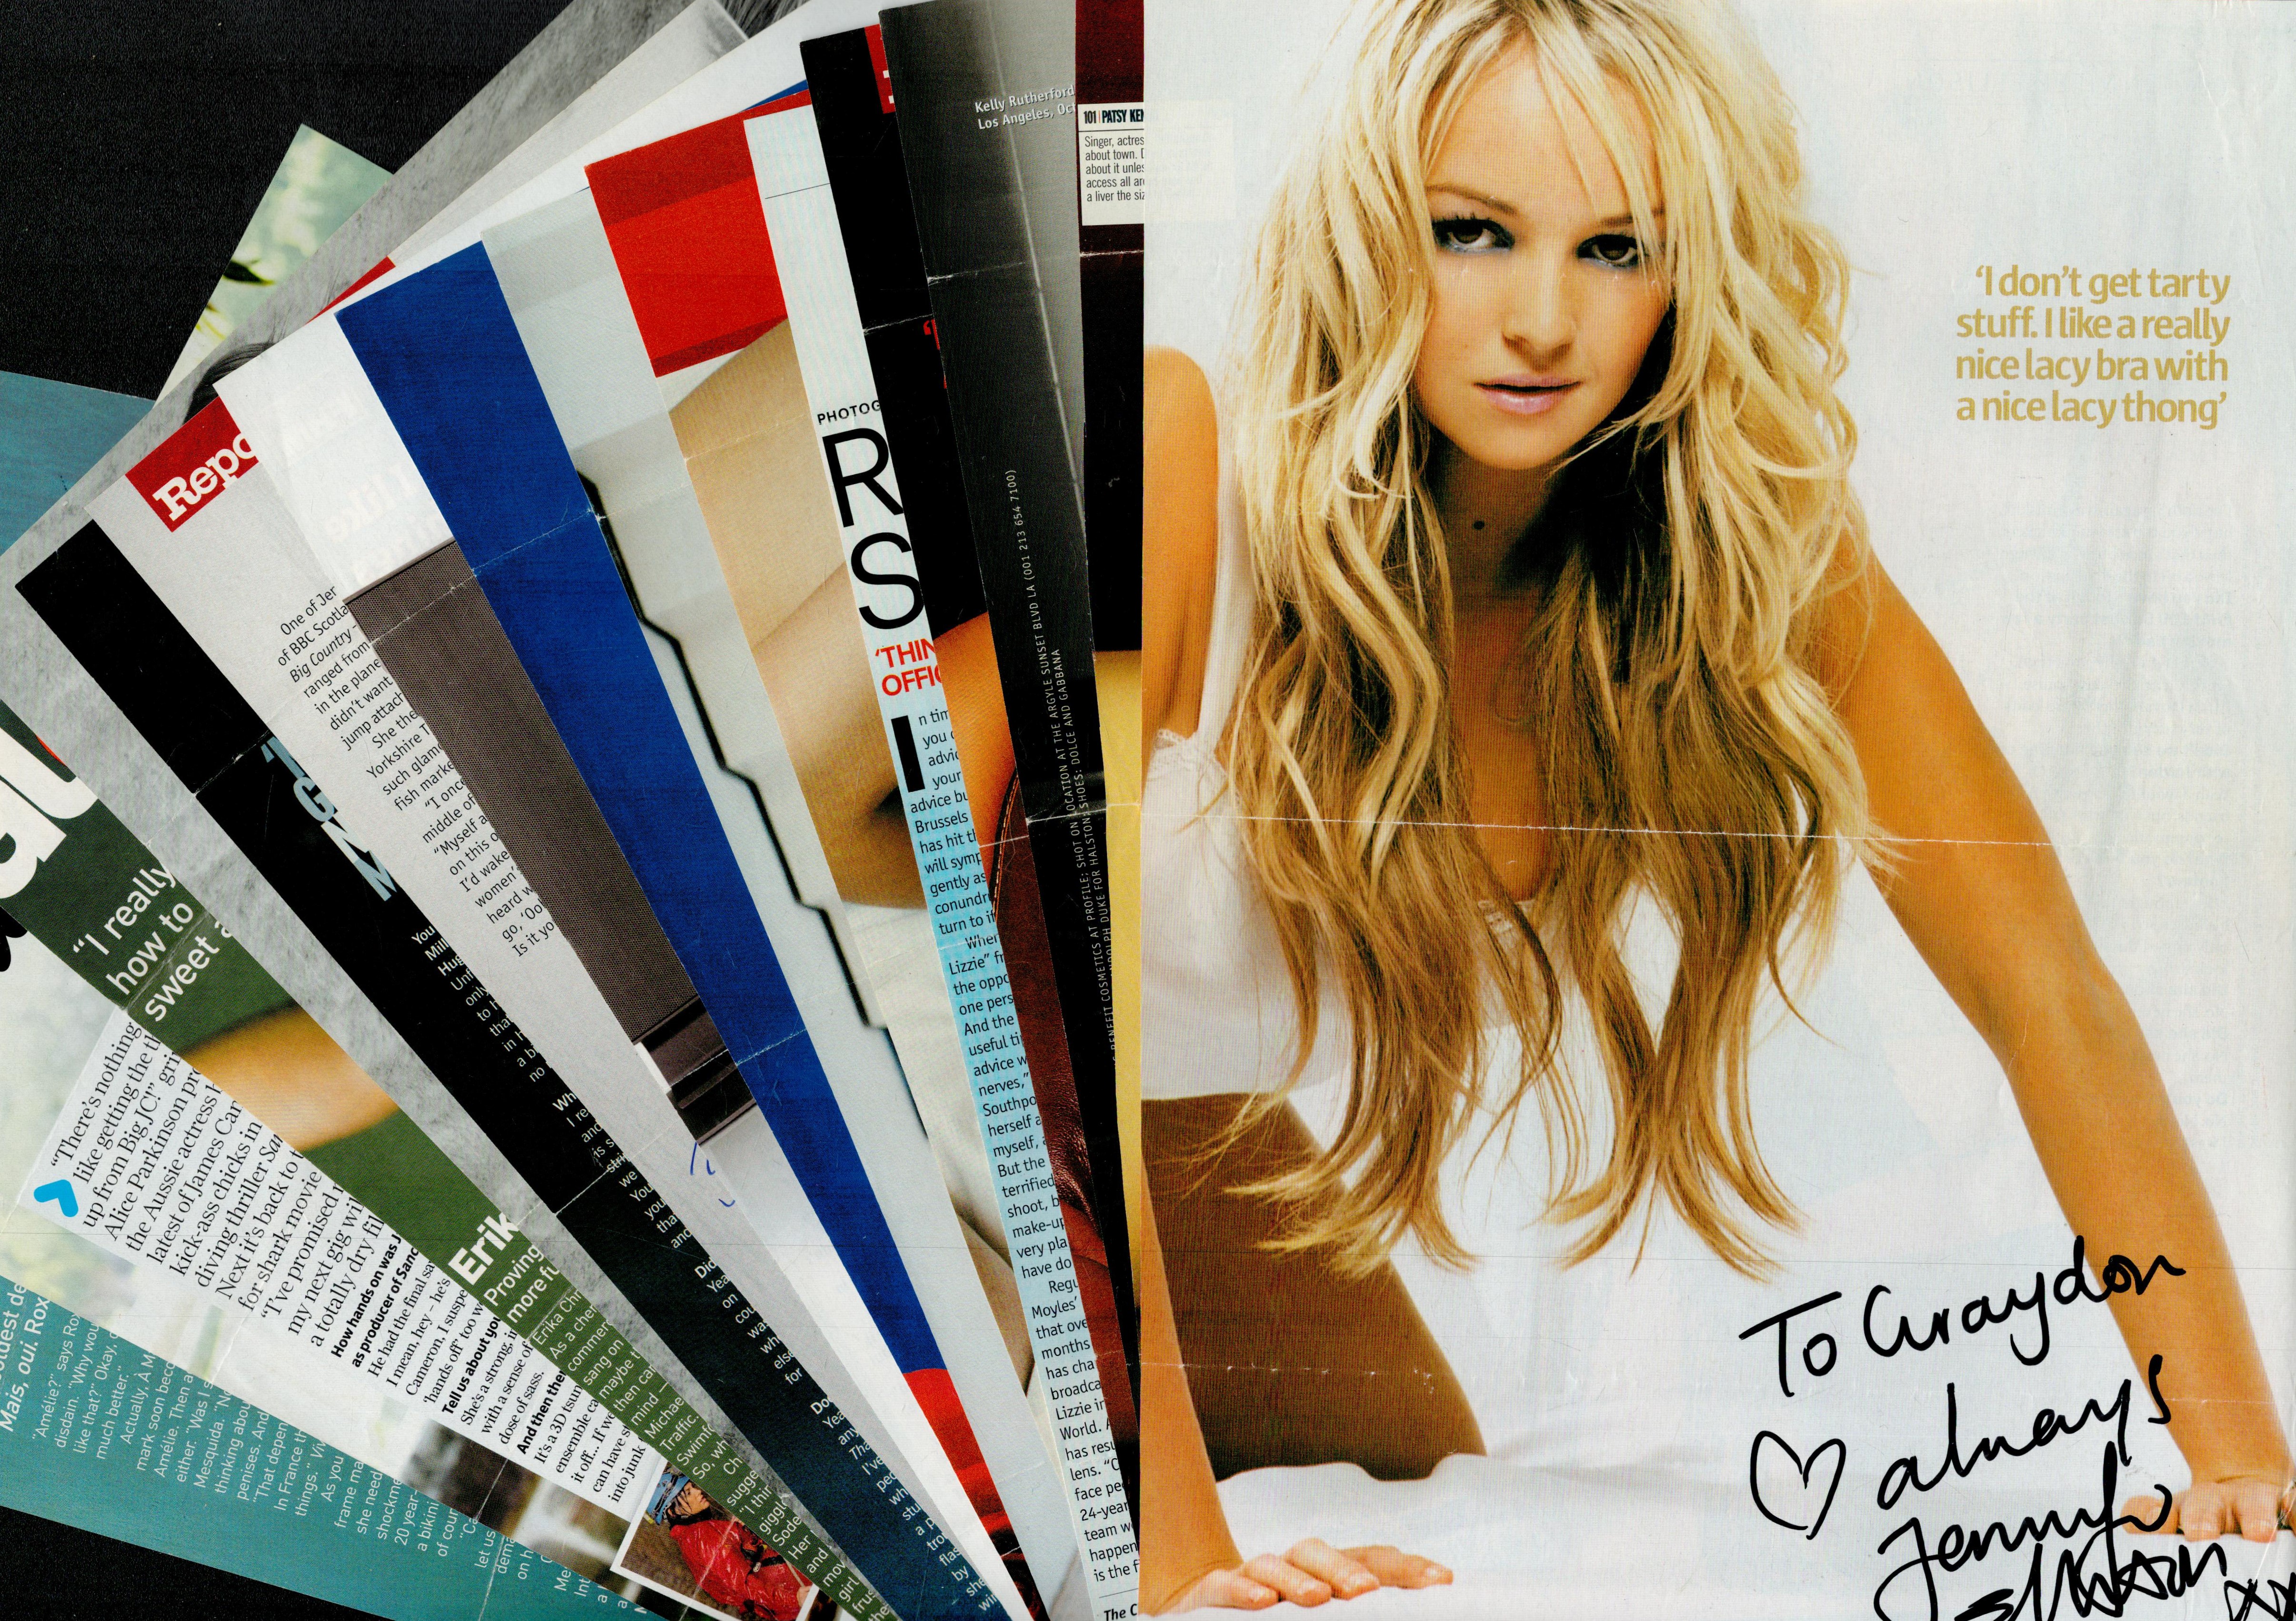 Models. 15 Collection x Magazine page. Signed signatures such as Jennifer Ellison. Patsy Kensit.